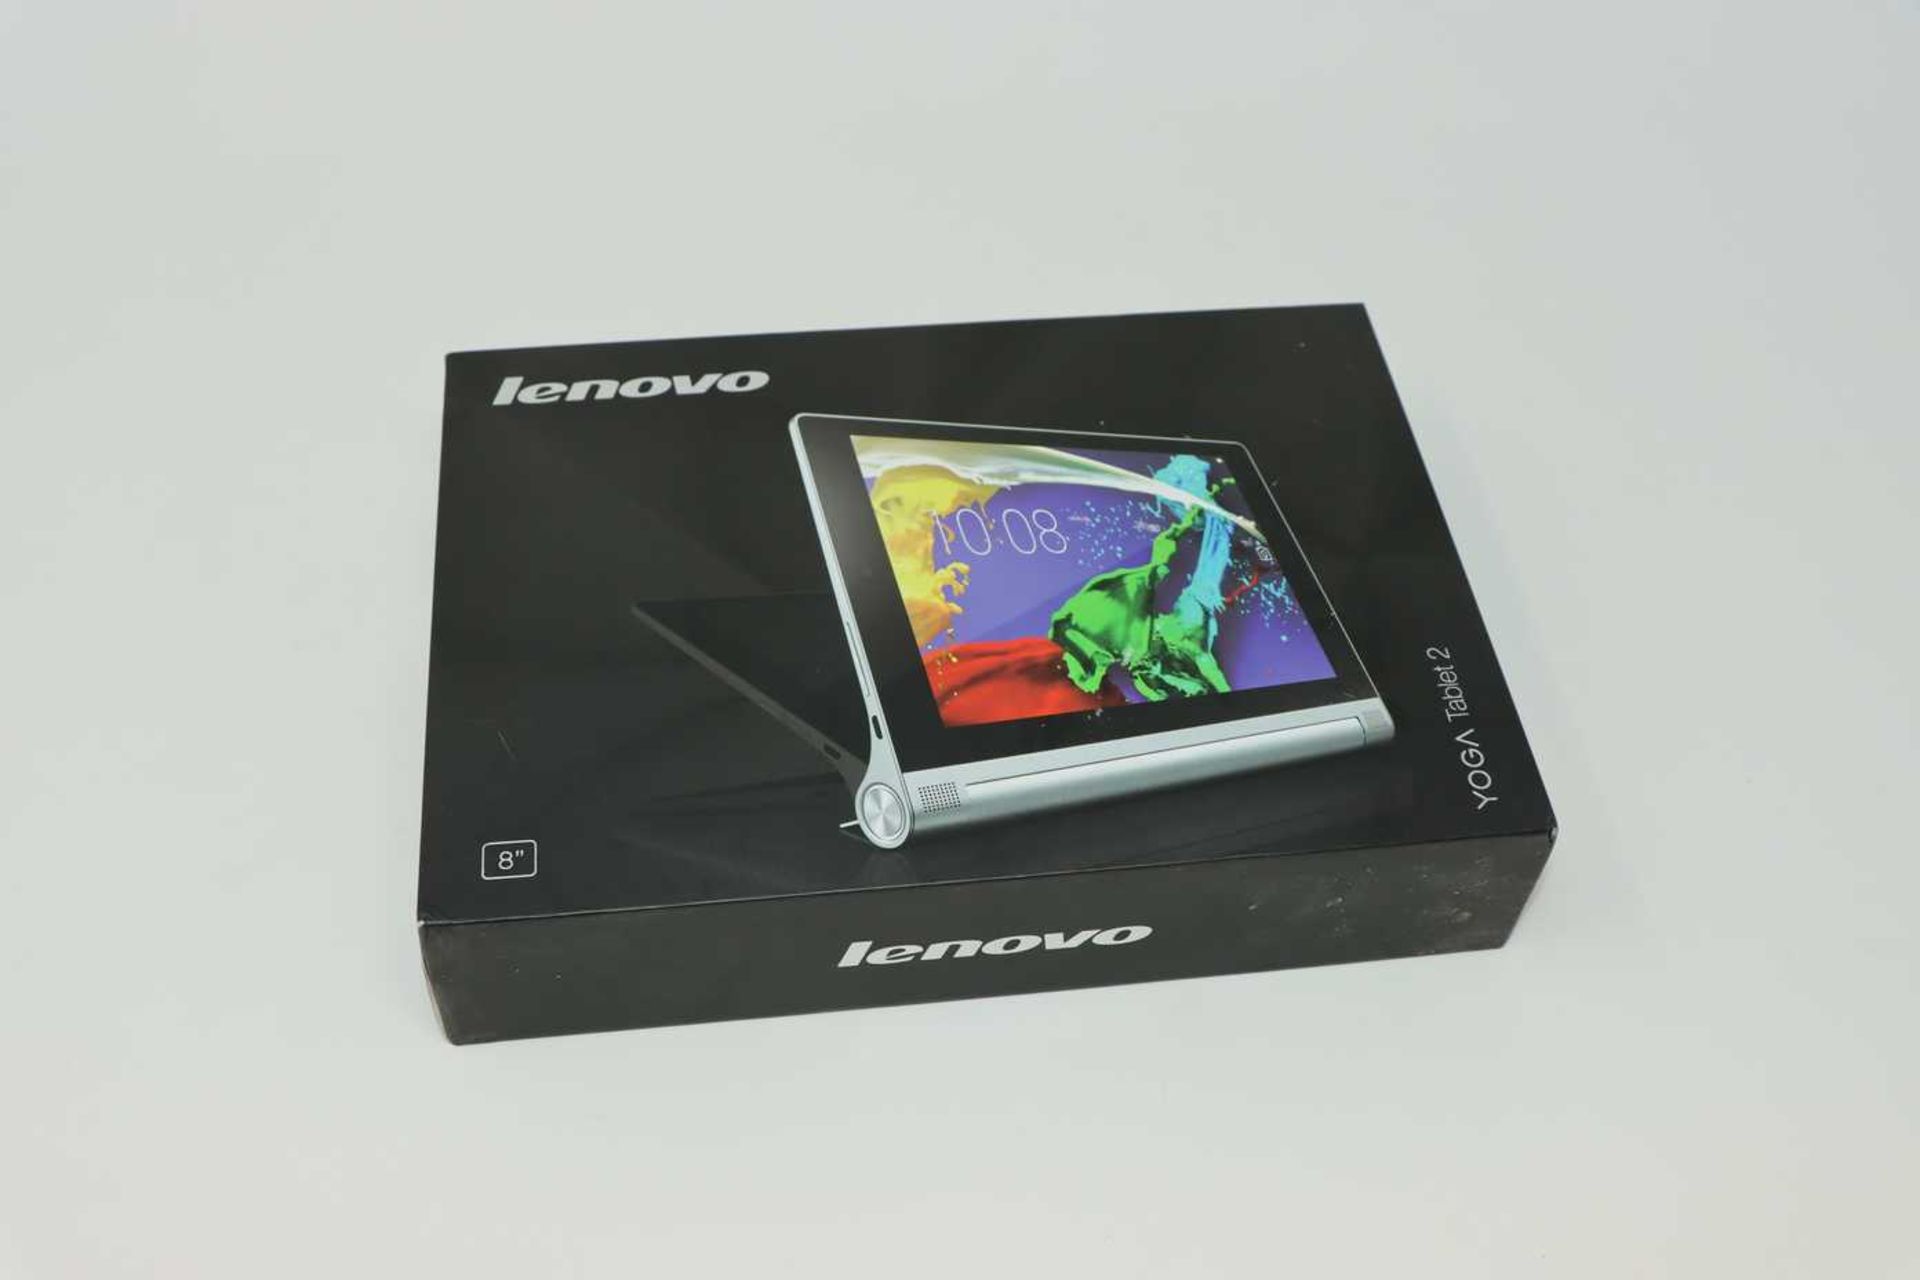 A pre-owned Lenovo YOGA Tablet 2-830F 16GB in Platinum (FRP clear, Boxed, No charger included).